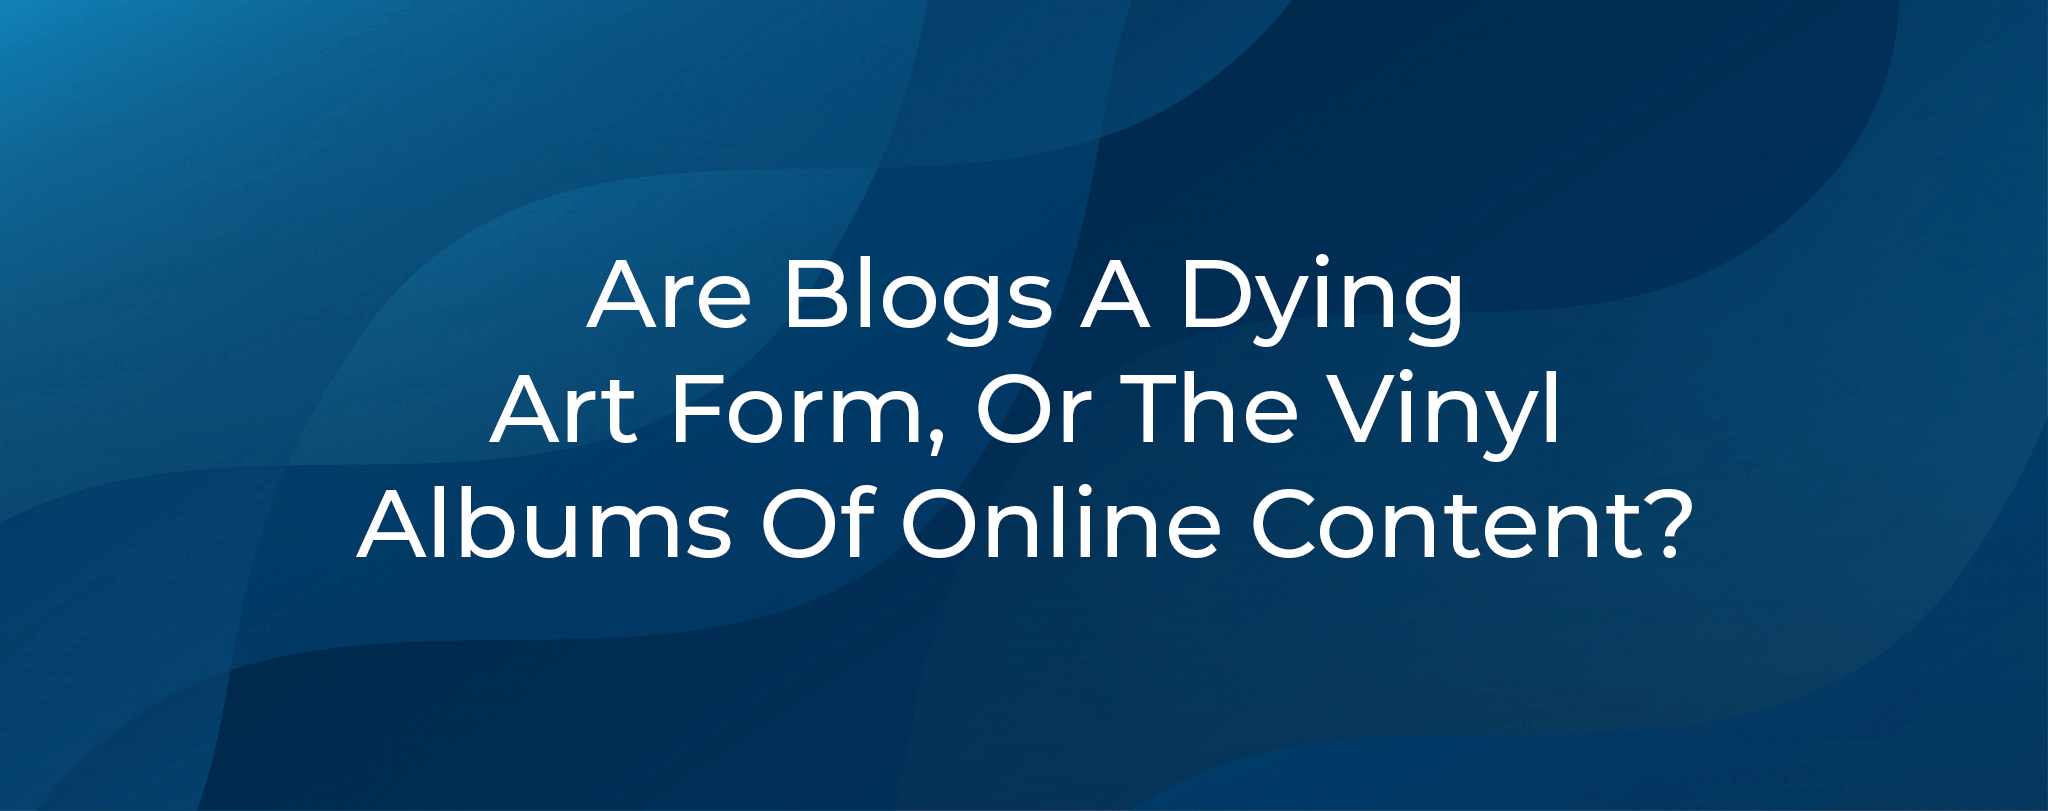 Are Blogs A Dying Art Form Or Vinyl Albums Of Online Content